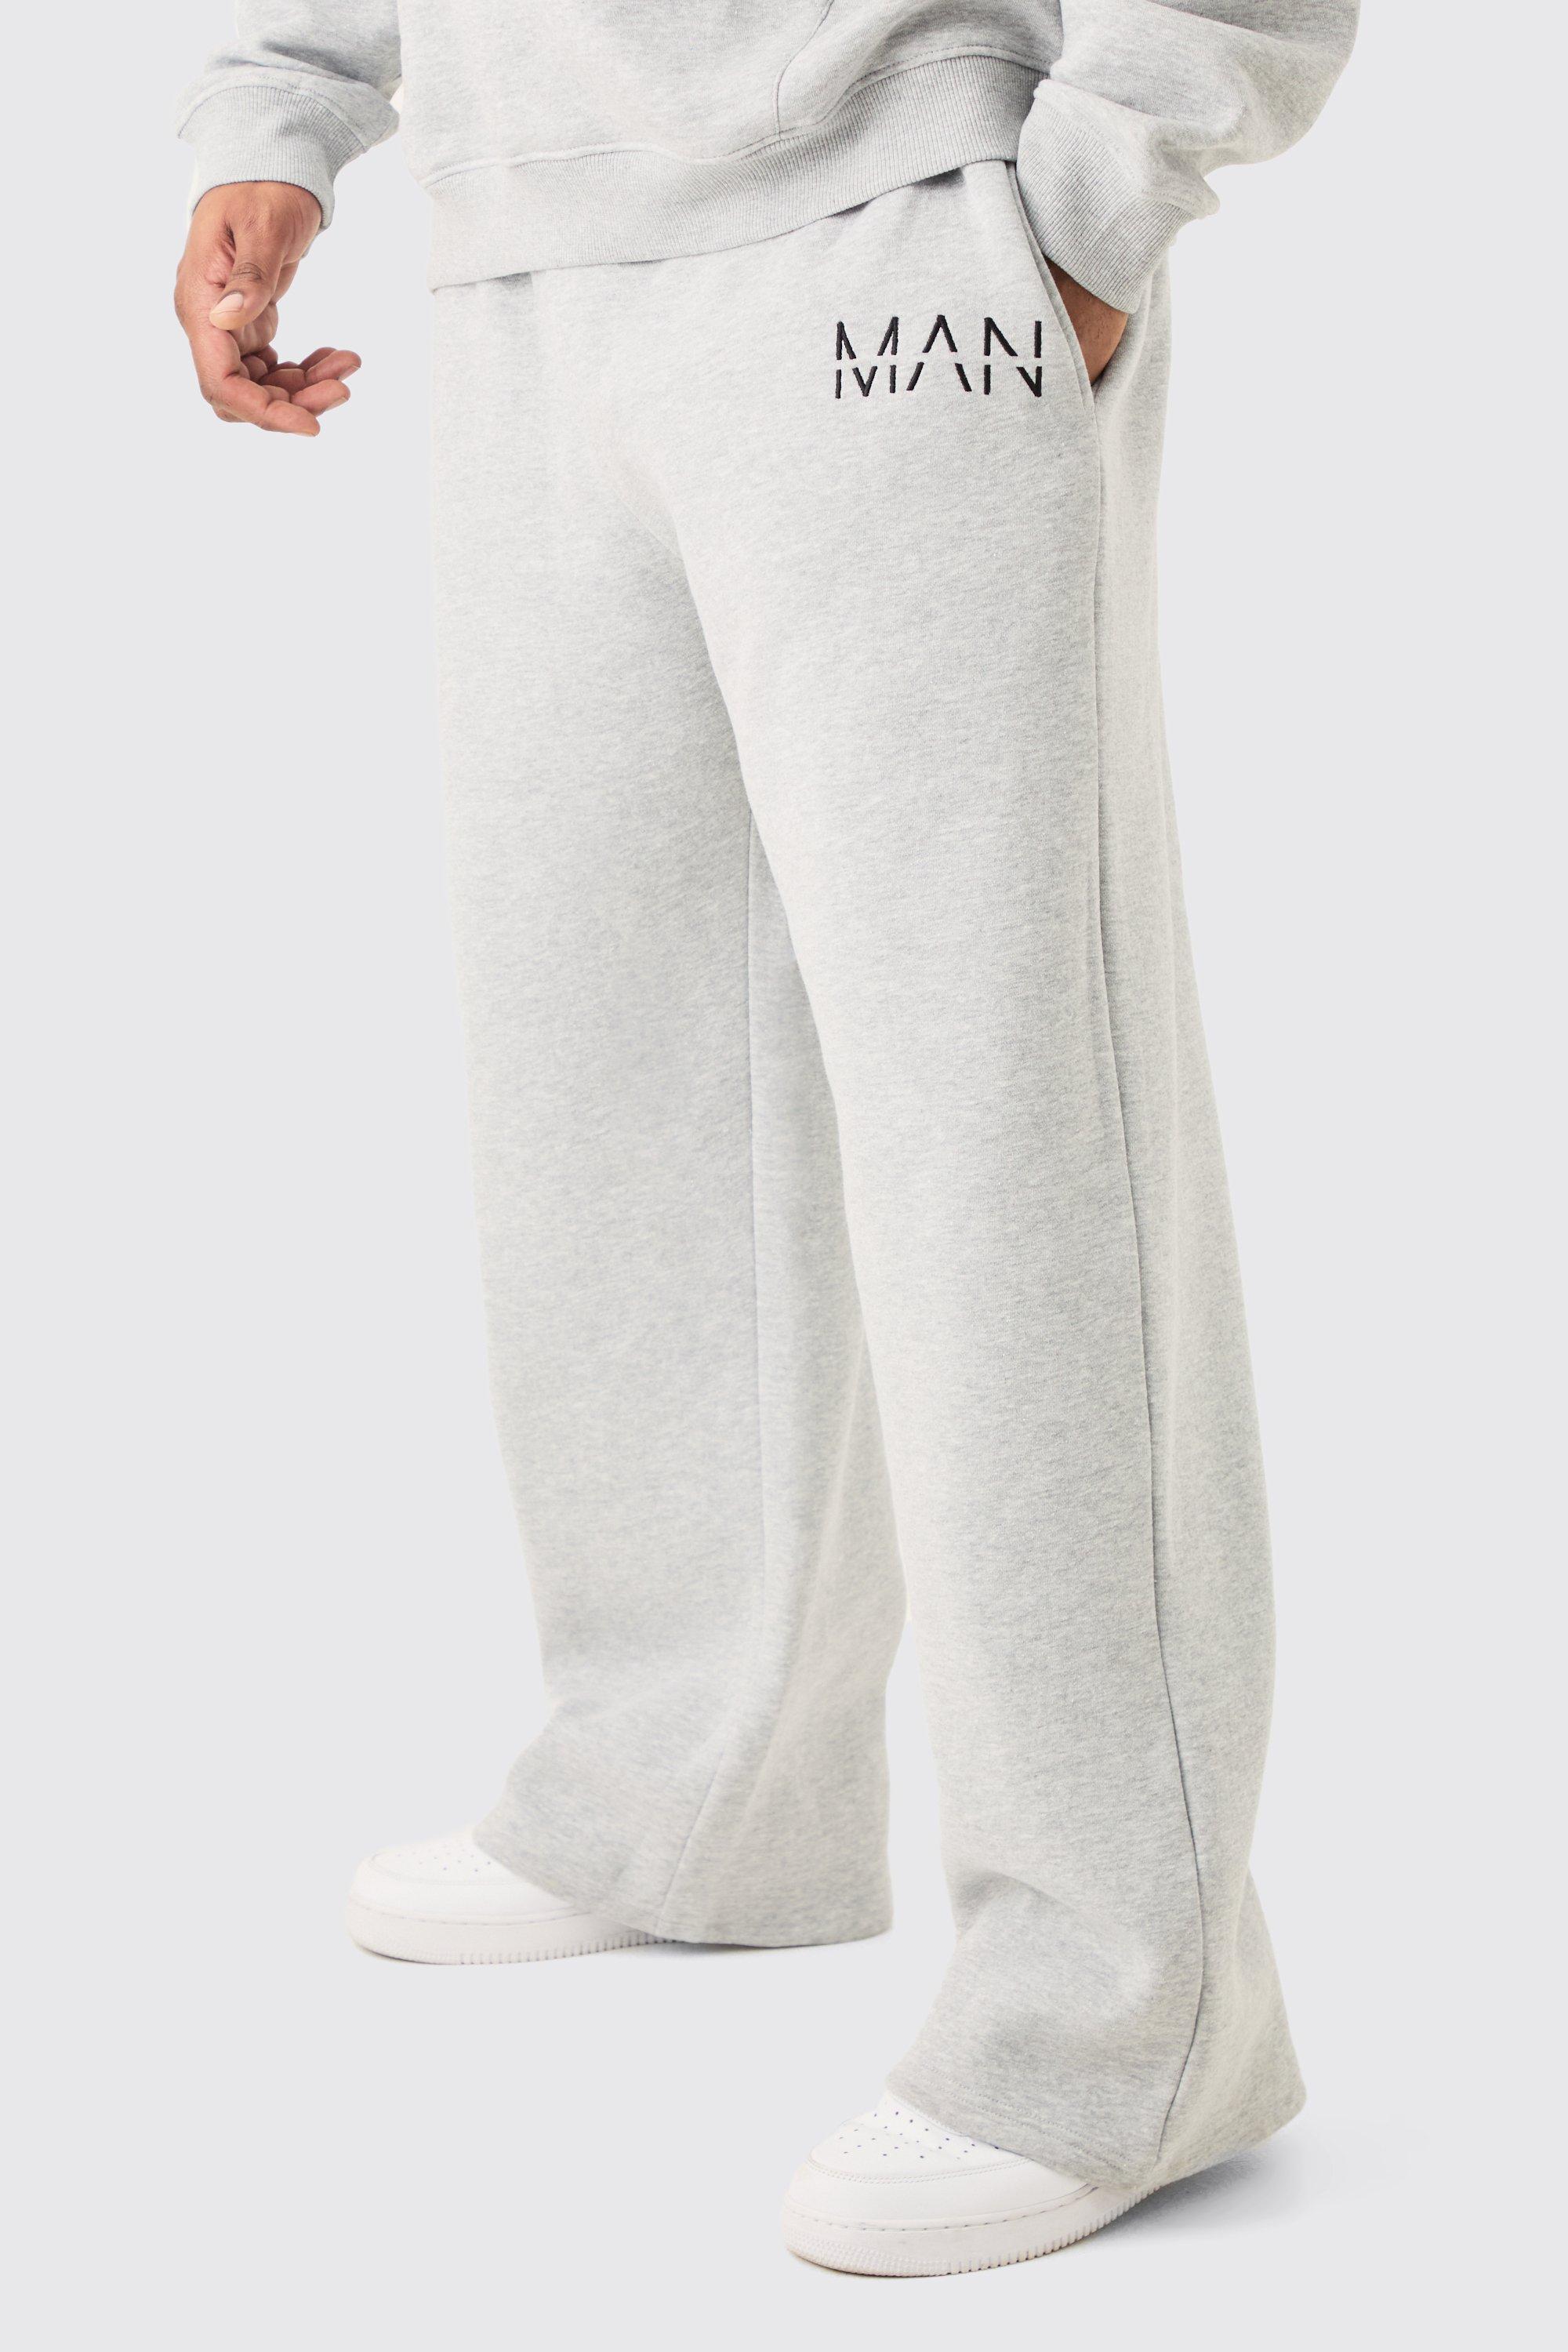 Image of Plus Man Dash Relaxed Fit Jogger In Grey Marl, Grigio